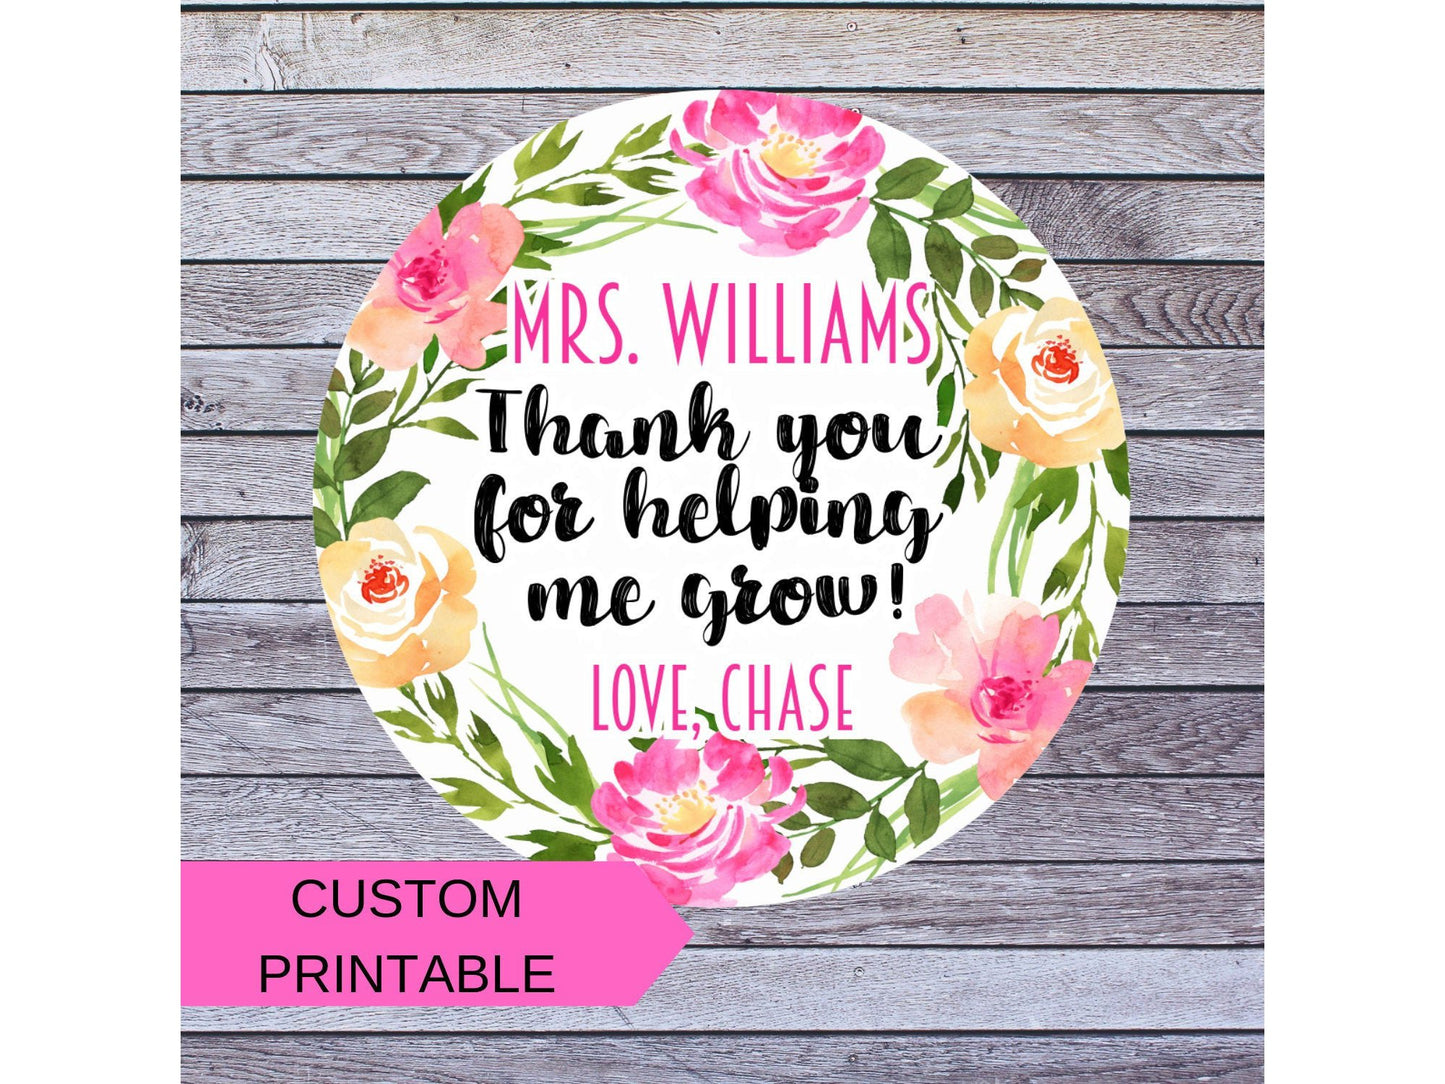 Printable Teacher Appreciation Gift Tag - Thank You for Helping Me Grow